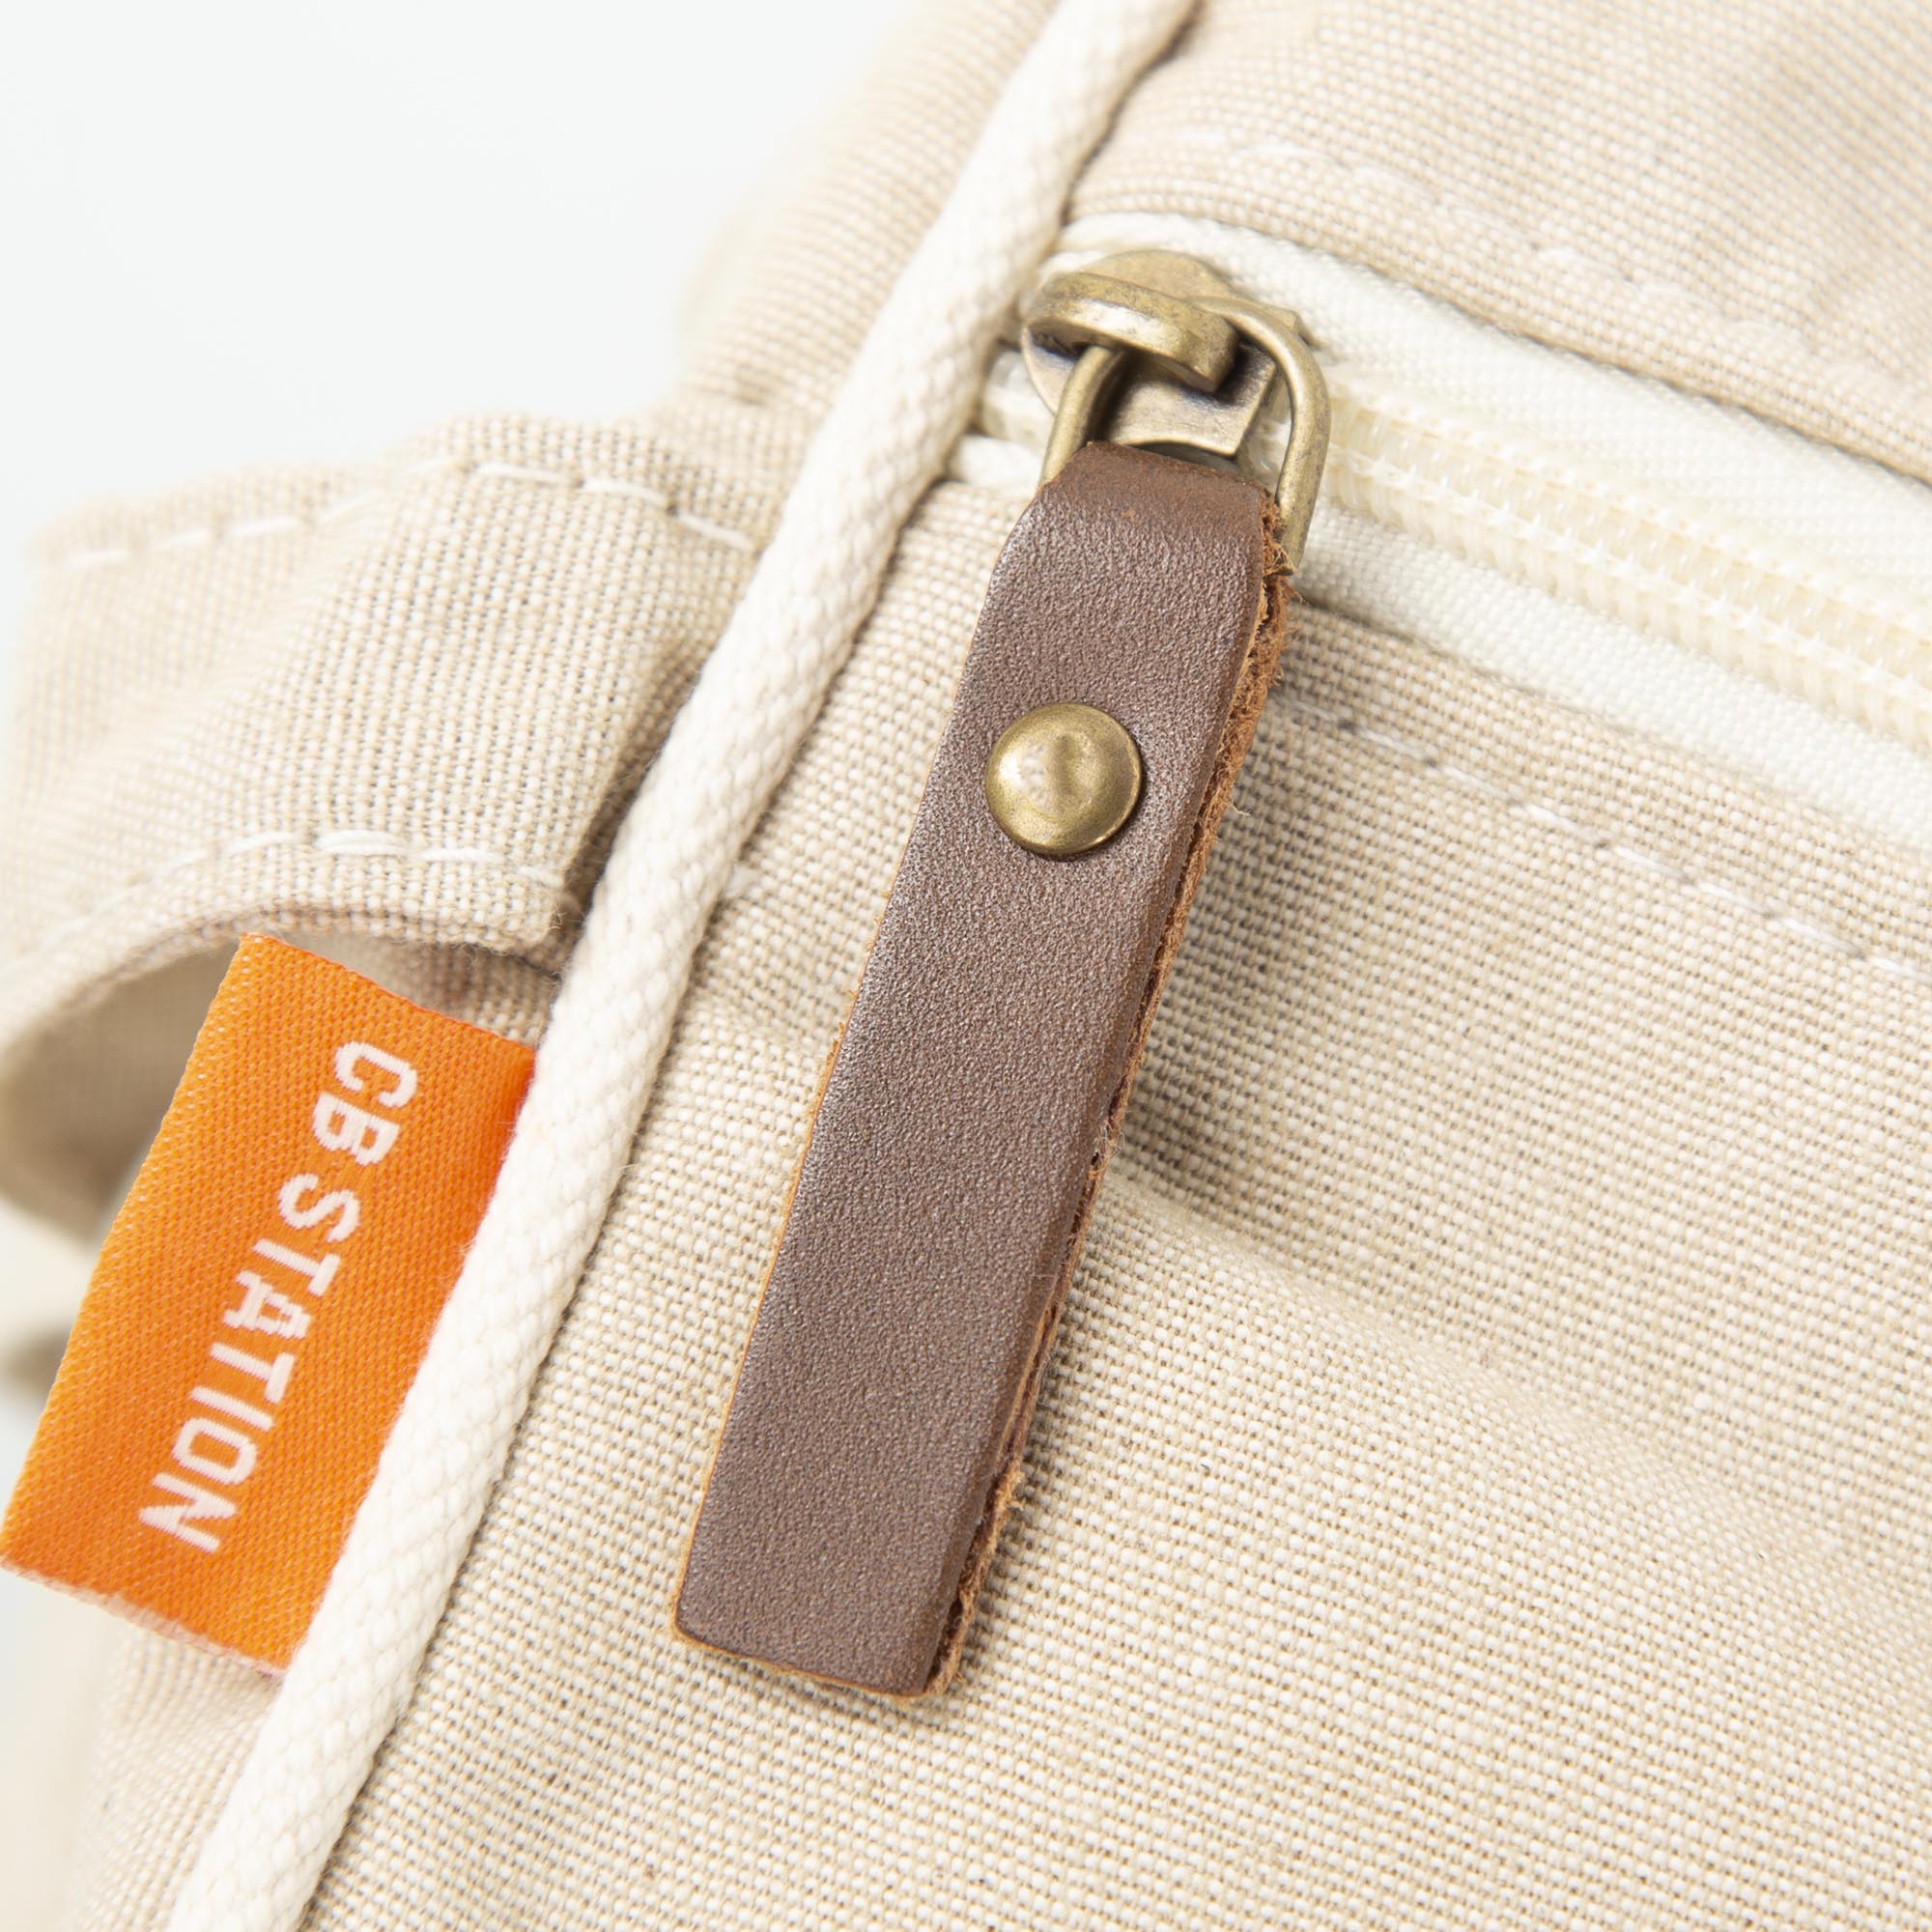 Outer zipper compartment